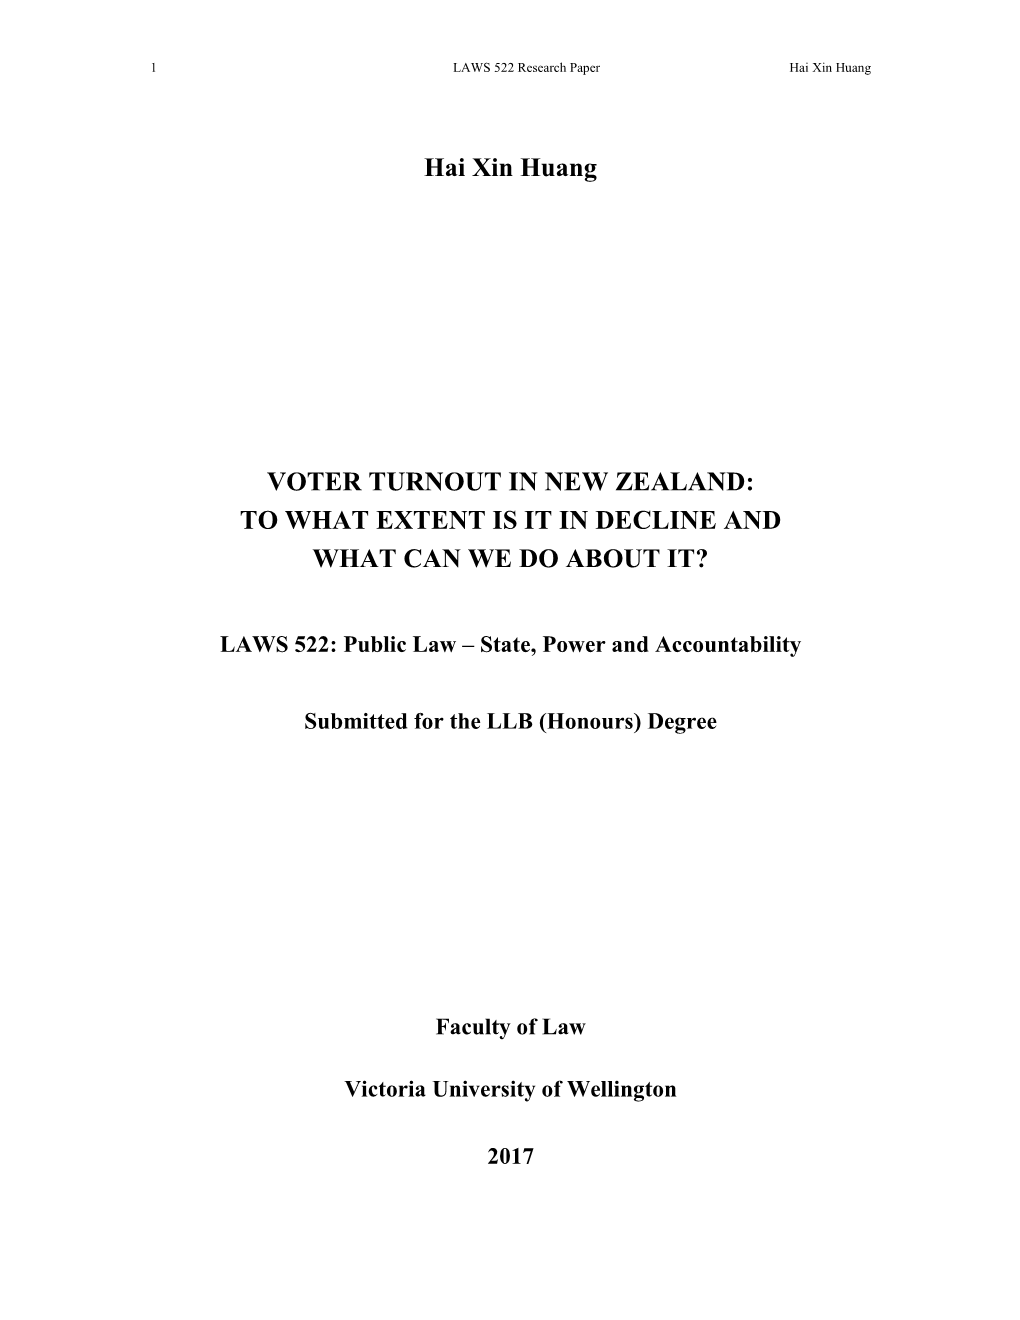 Hai Xin Huang VOTER TURNOUT in NEW ZEALAND